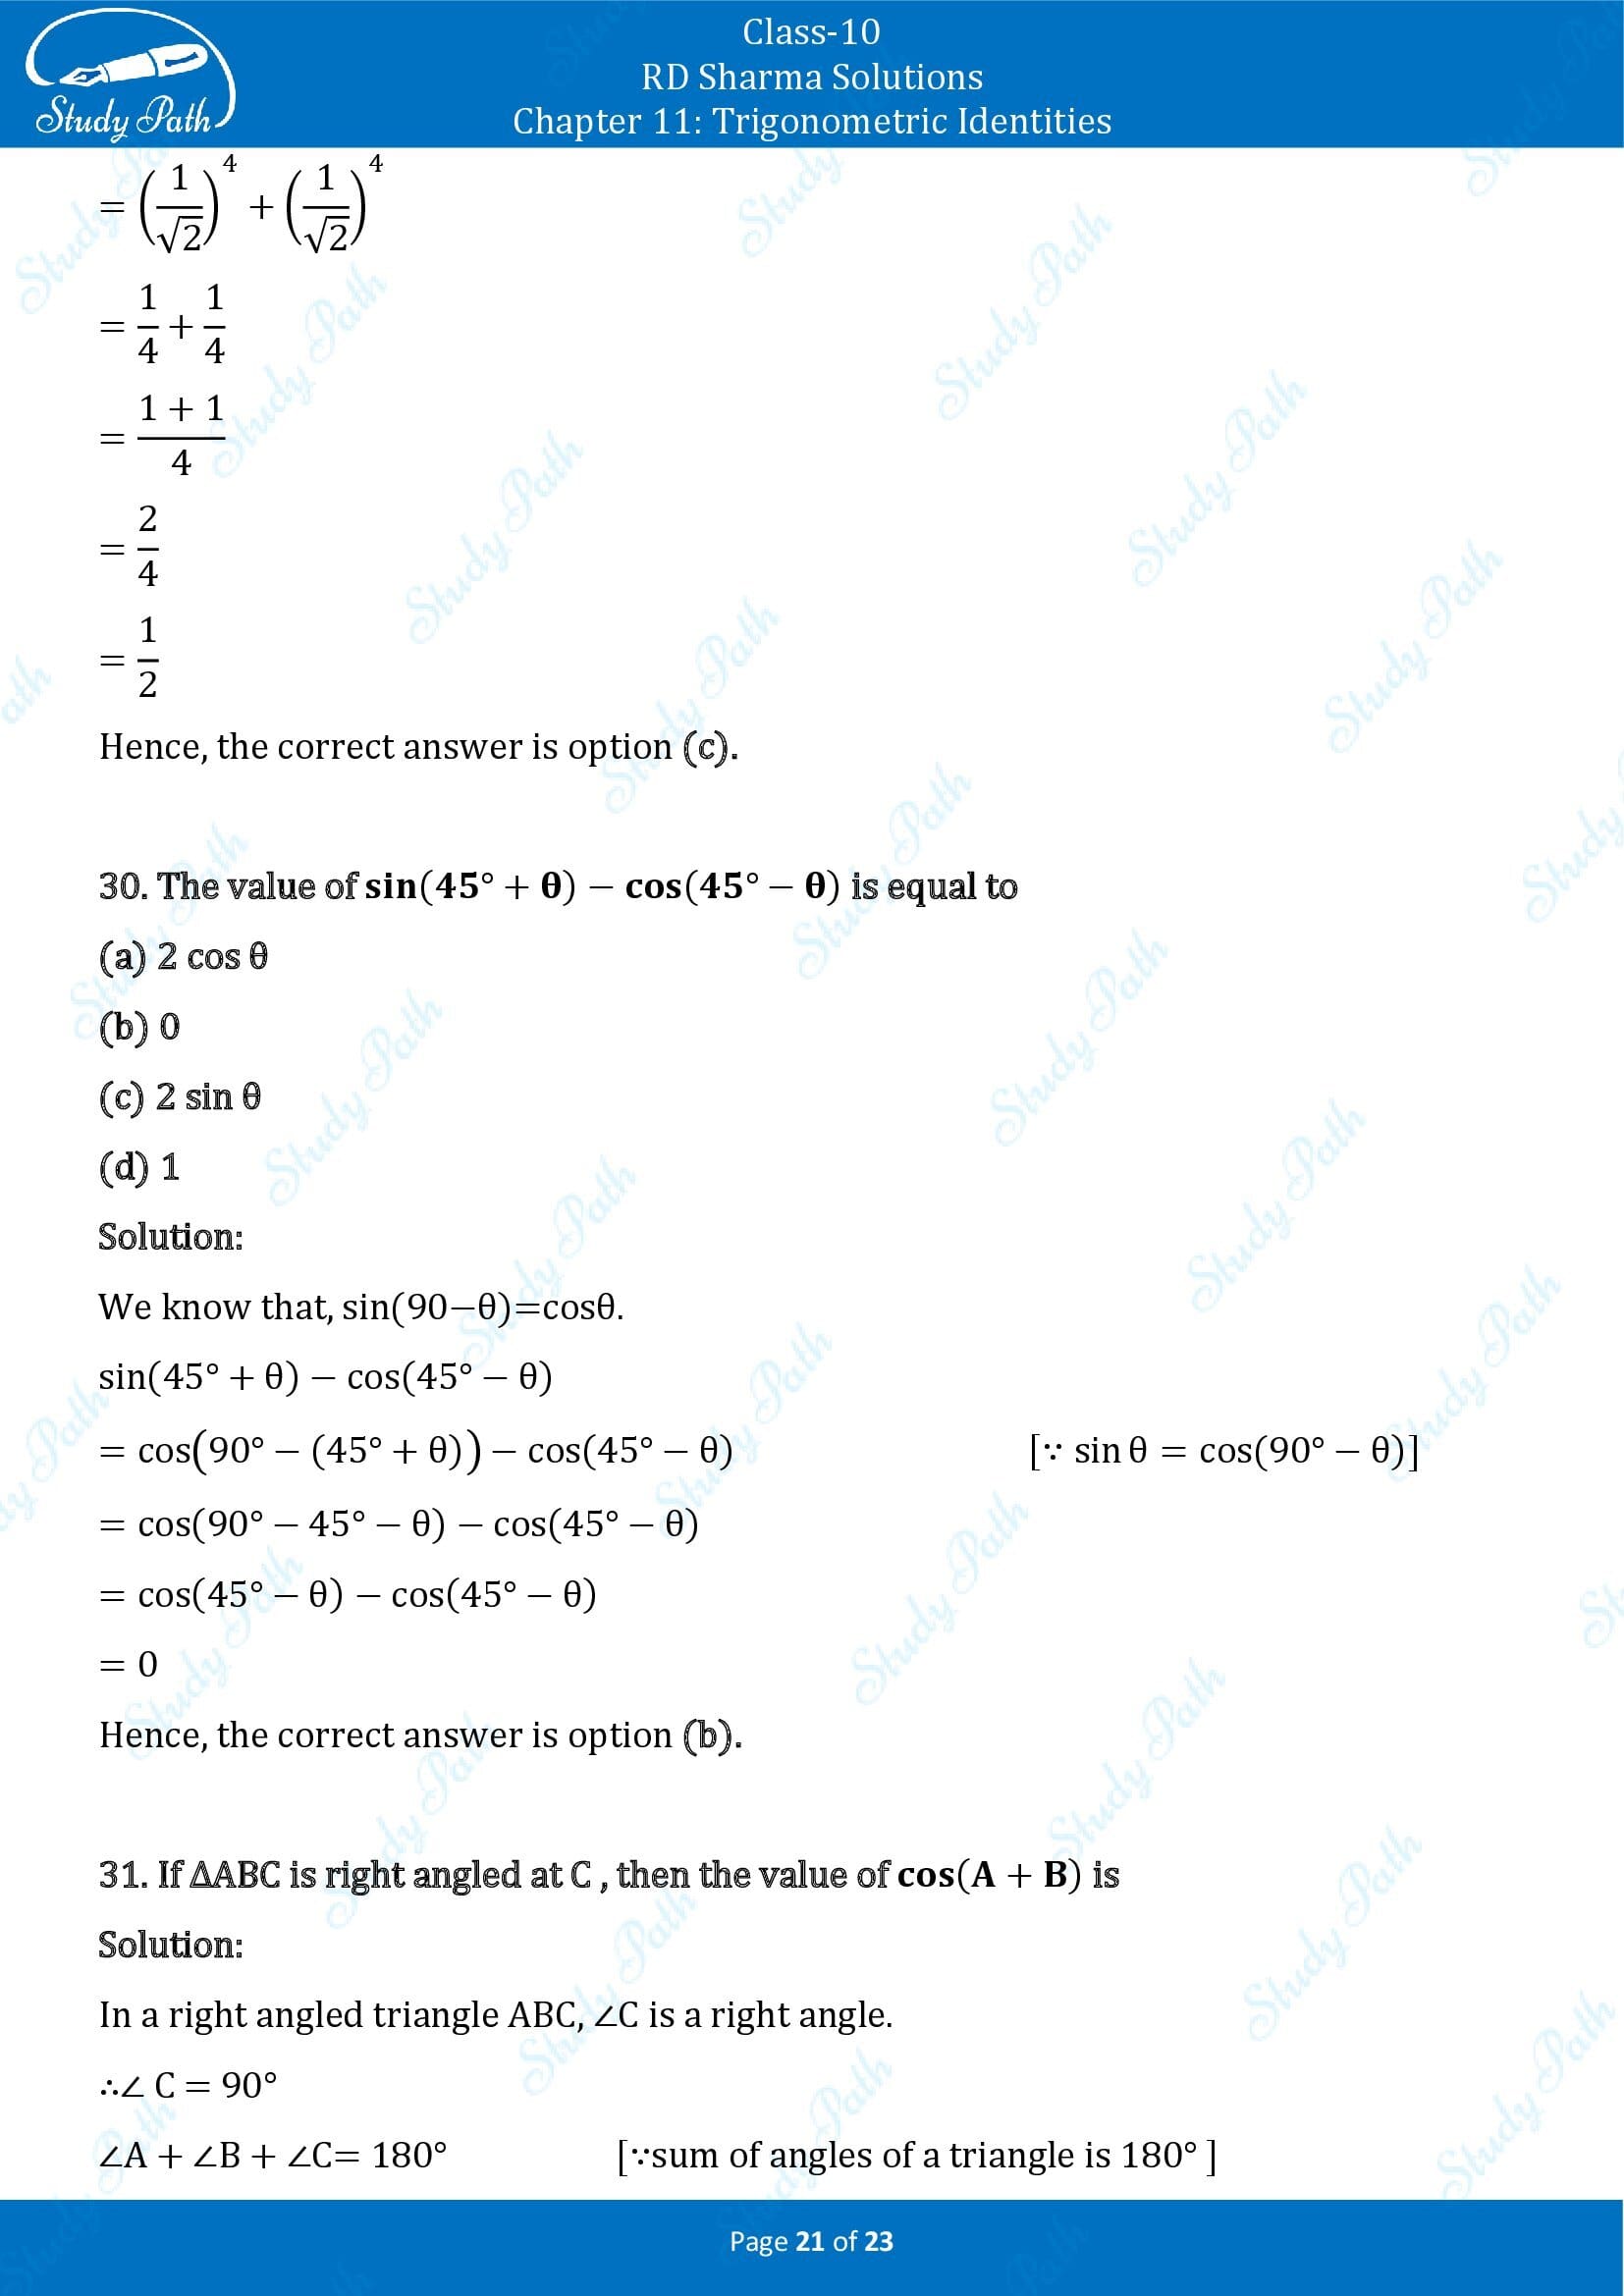 RD Sharma Solutions Class 10 Chapter 11 Trigonometric Identities Multiple Choice Questions MCQs 00021